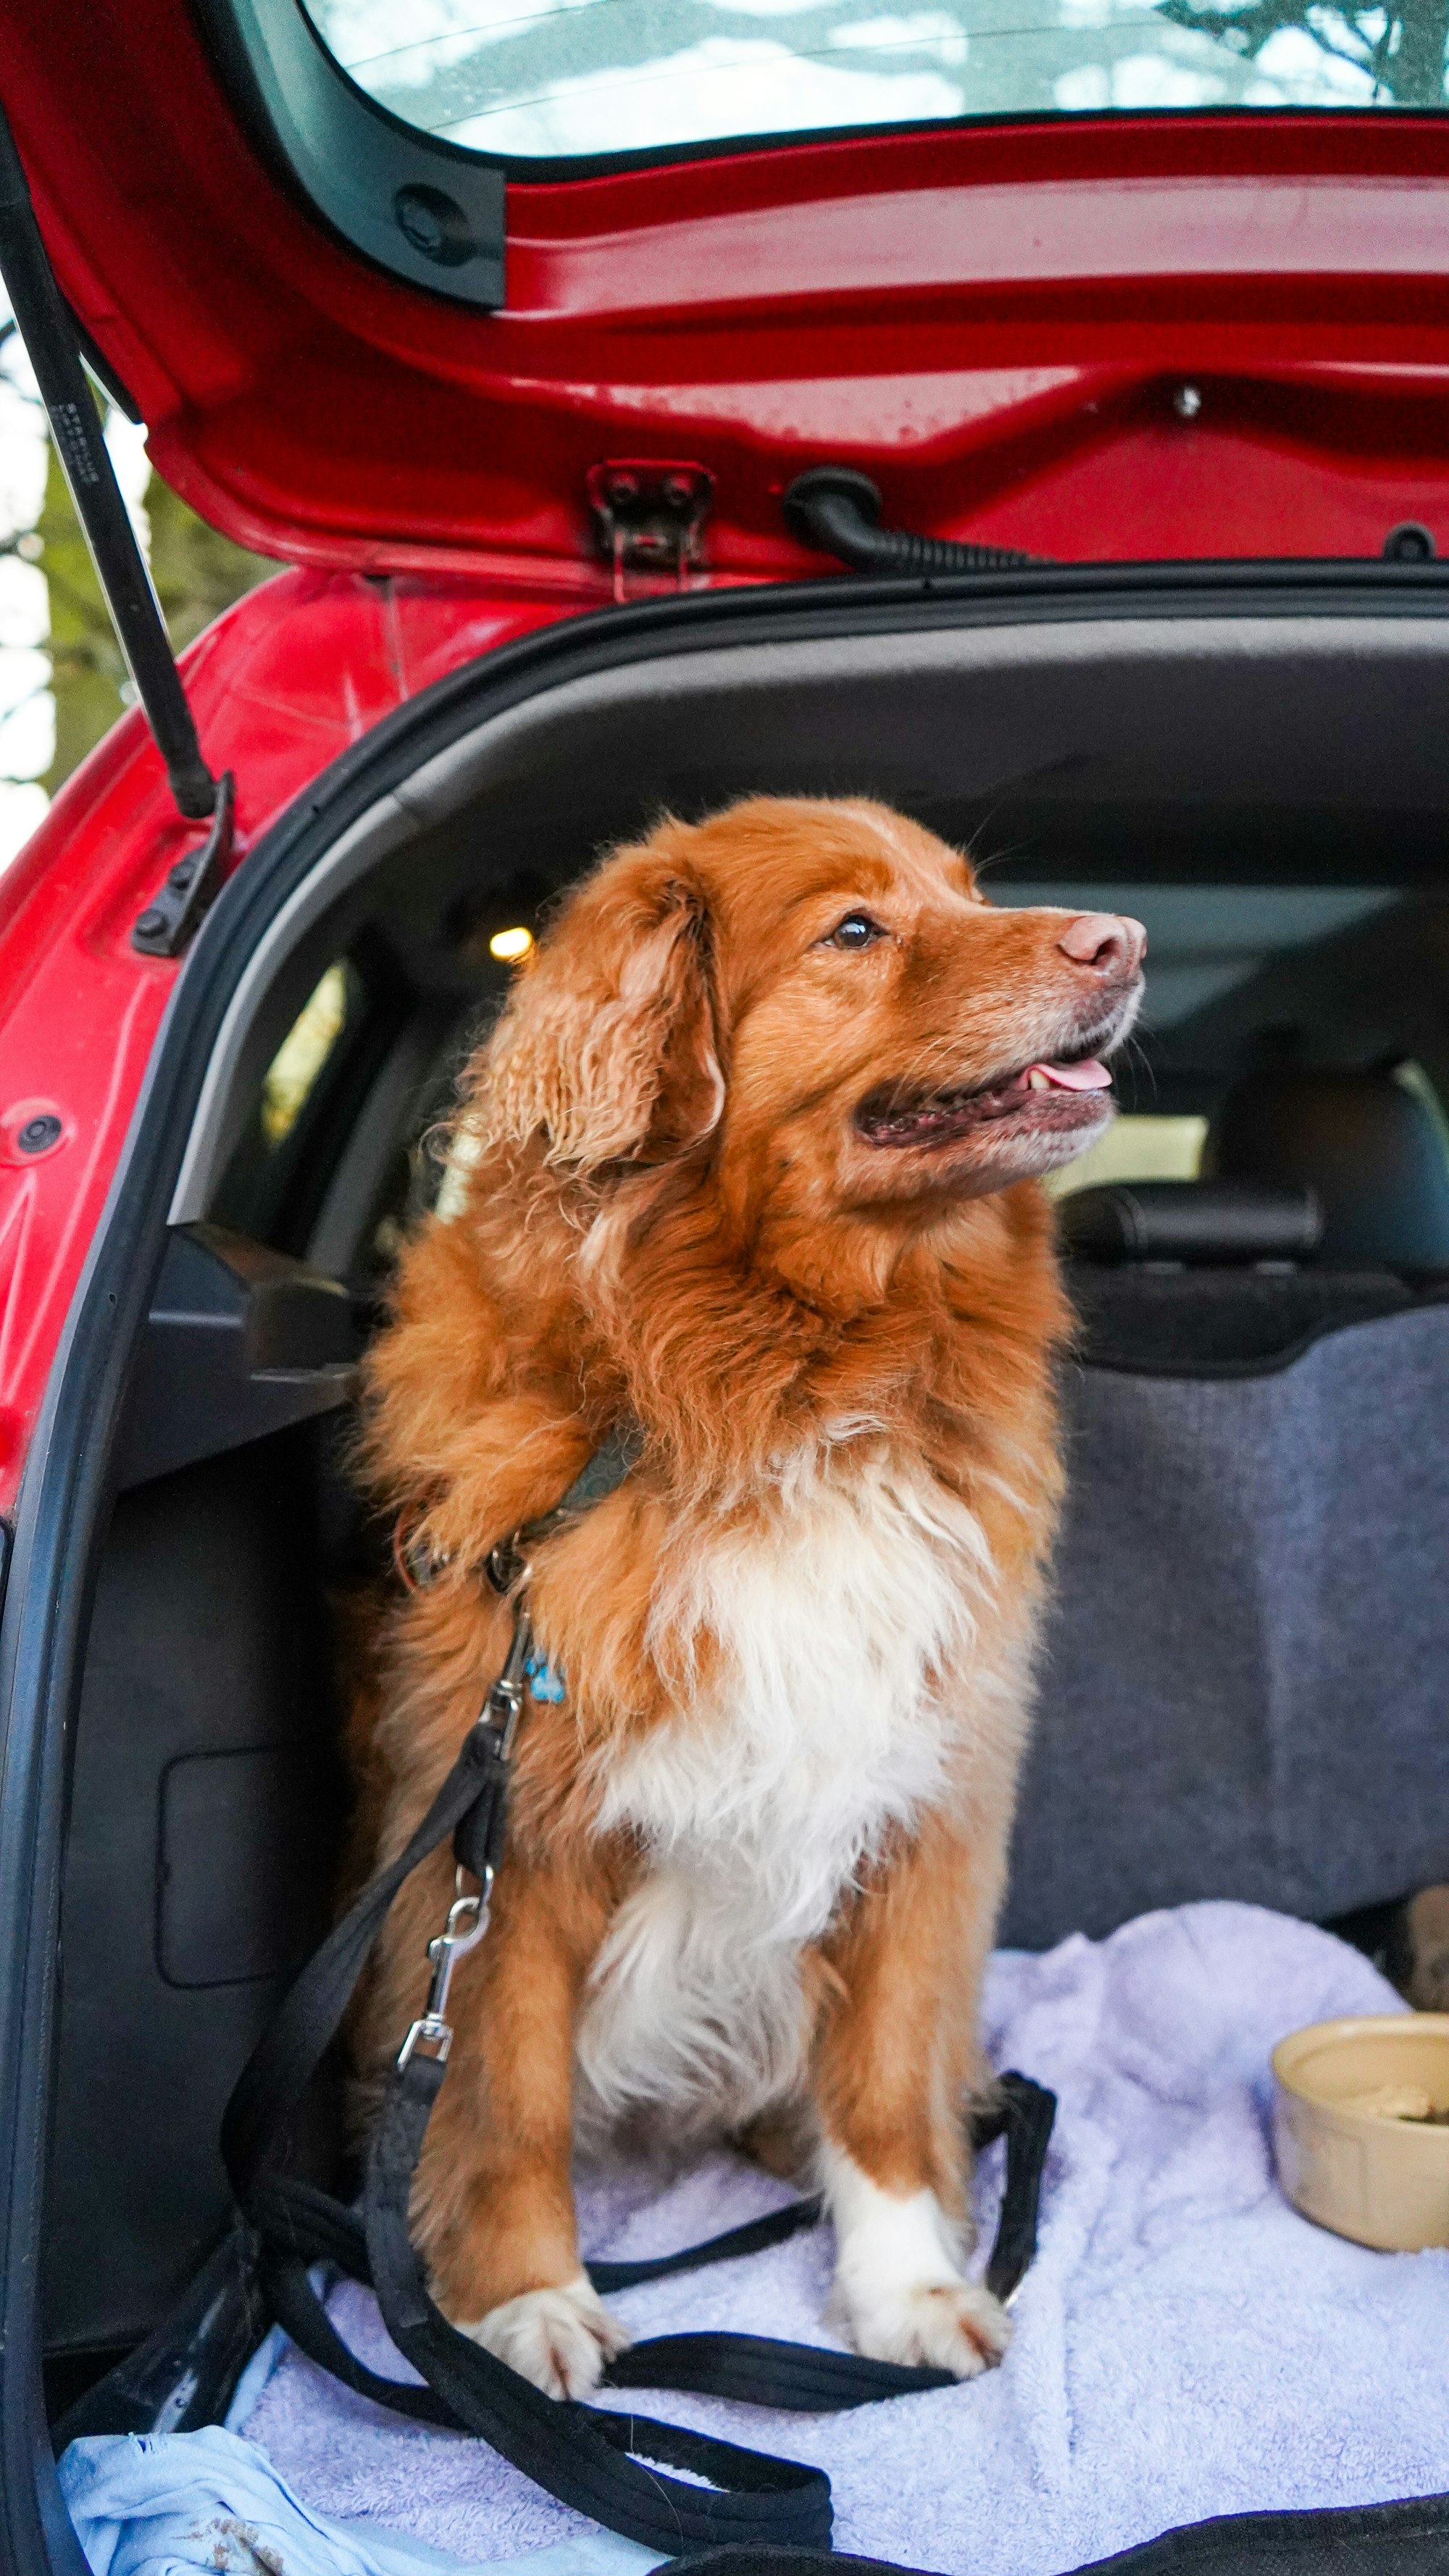 A Dog with Red Fur standing in the back of a car